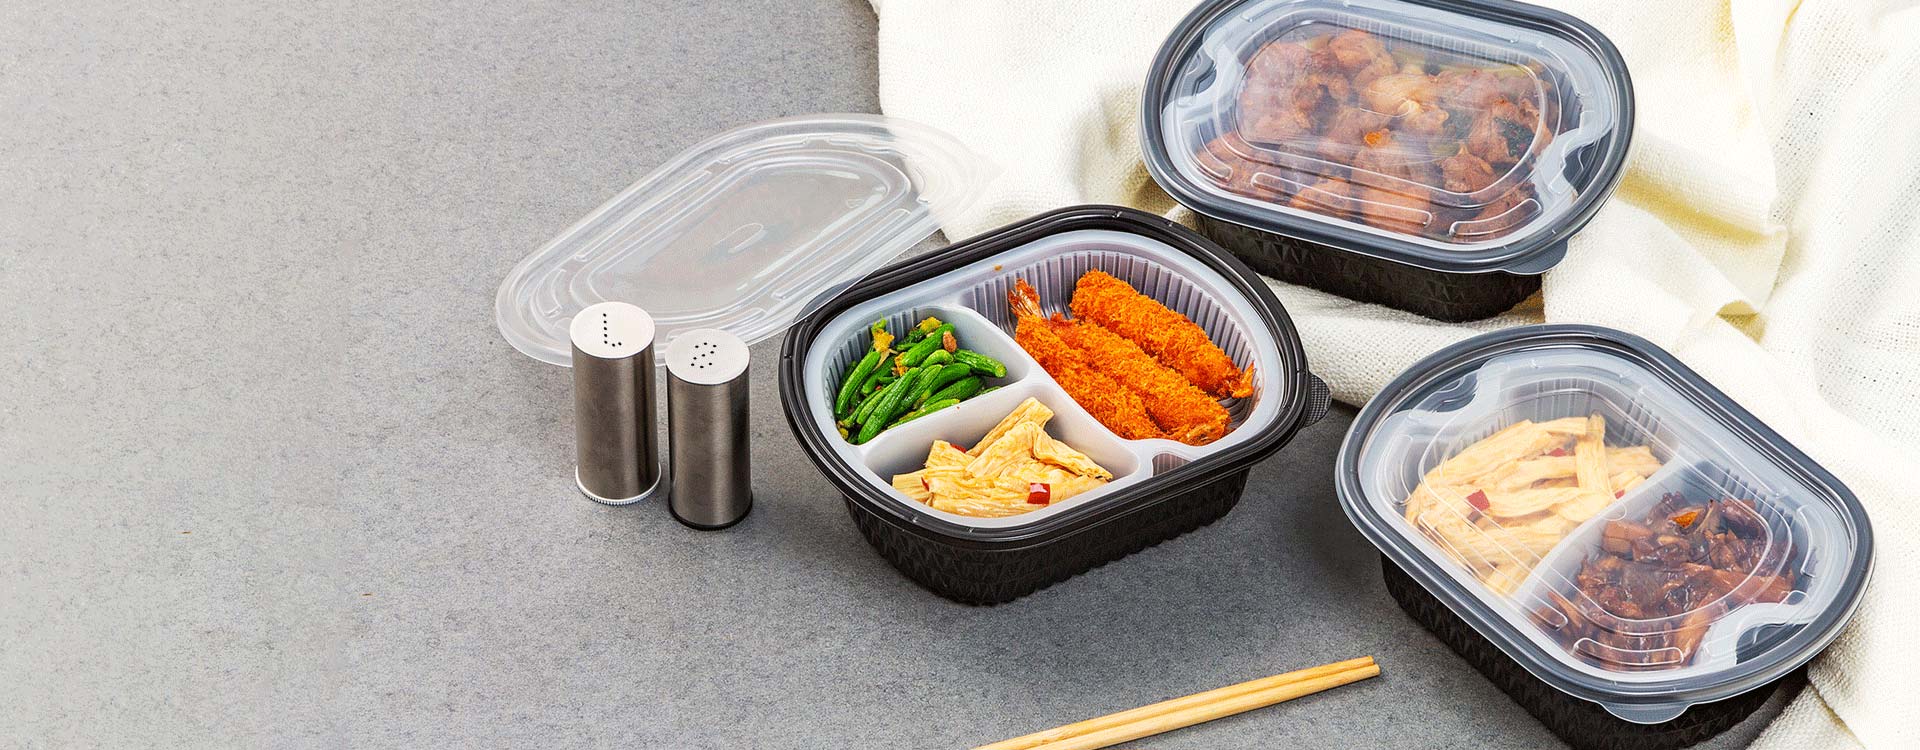 Wholesale Microwave, Oven Safe Takeout Containers for Restaurants &  Foodservice